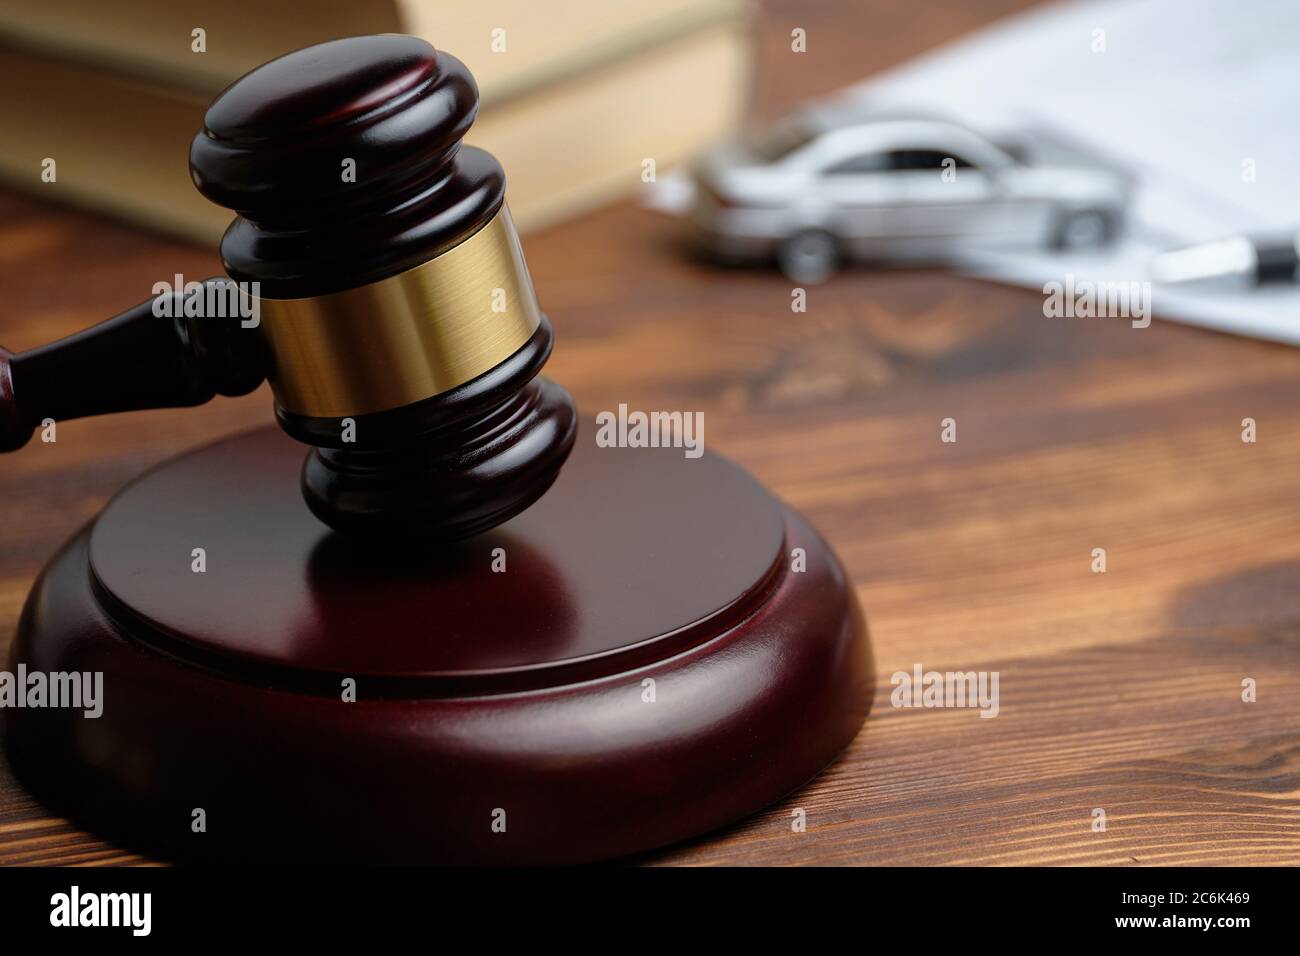 Driver license revocation concept next to the judge hammer. Stock Photo